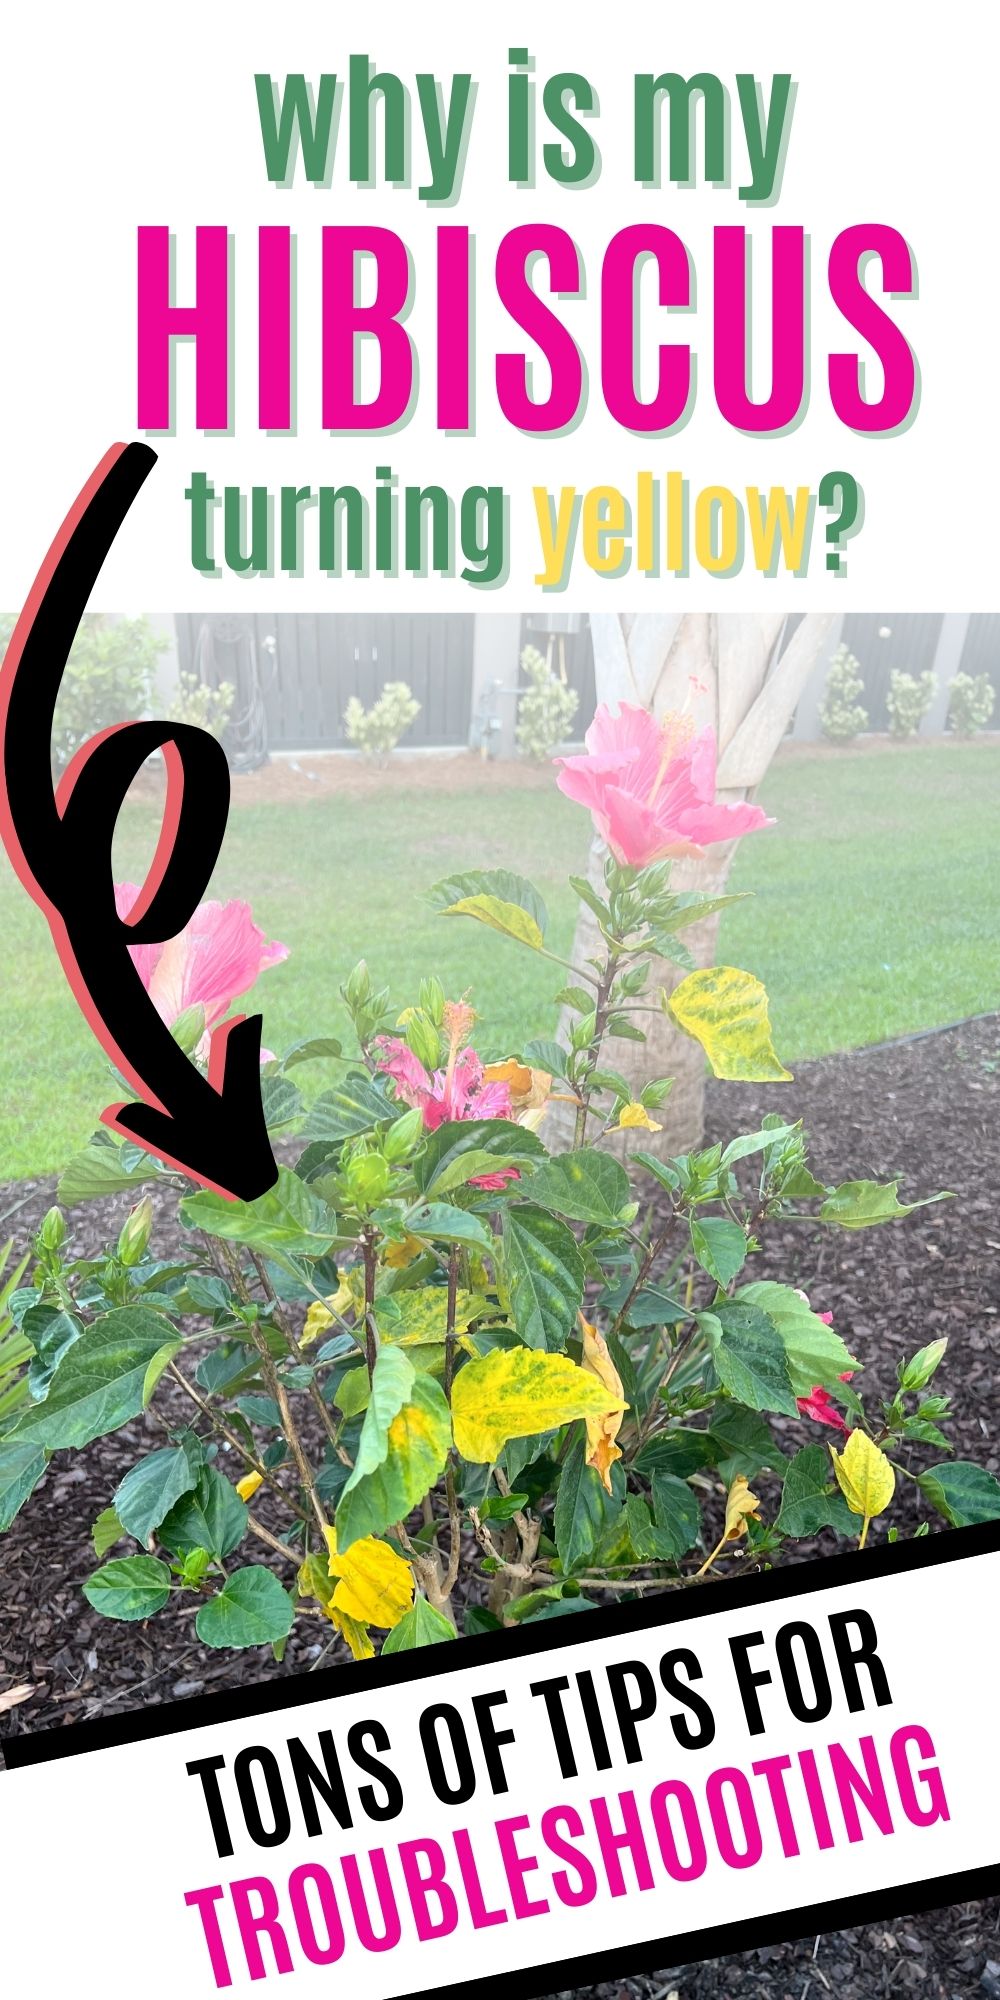 Why is my hibiscus getting yellow leaves?